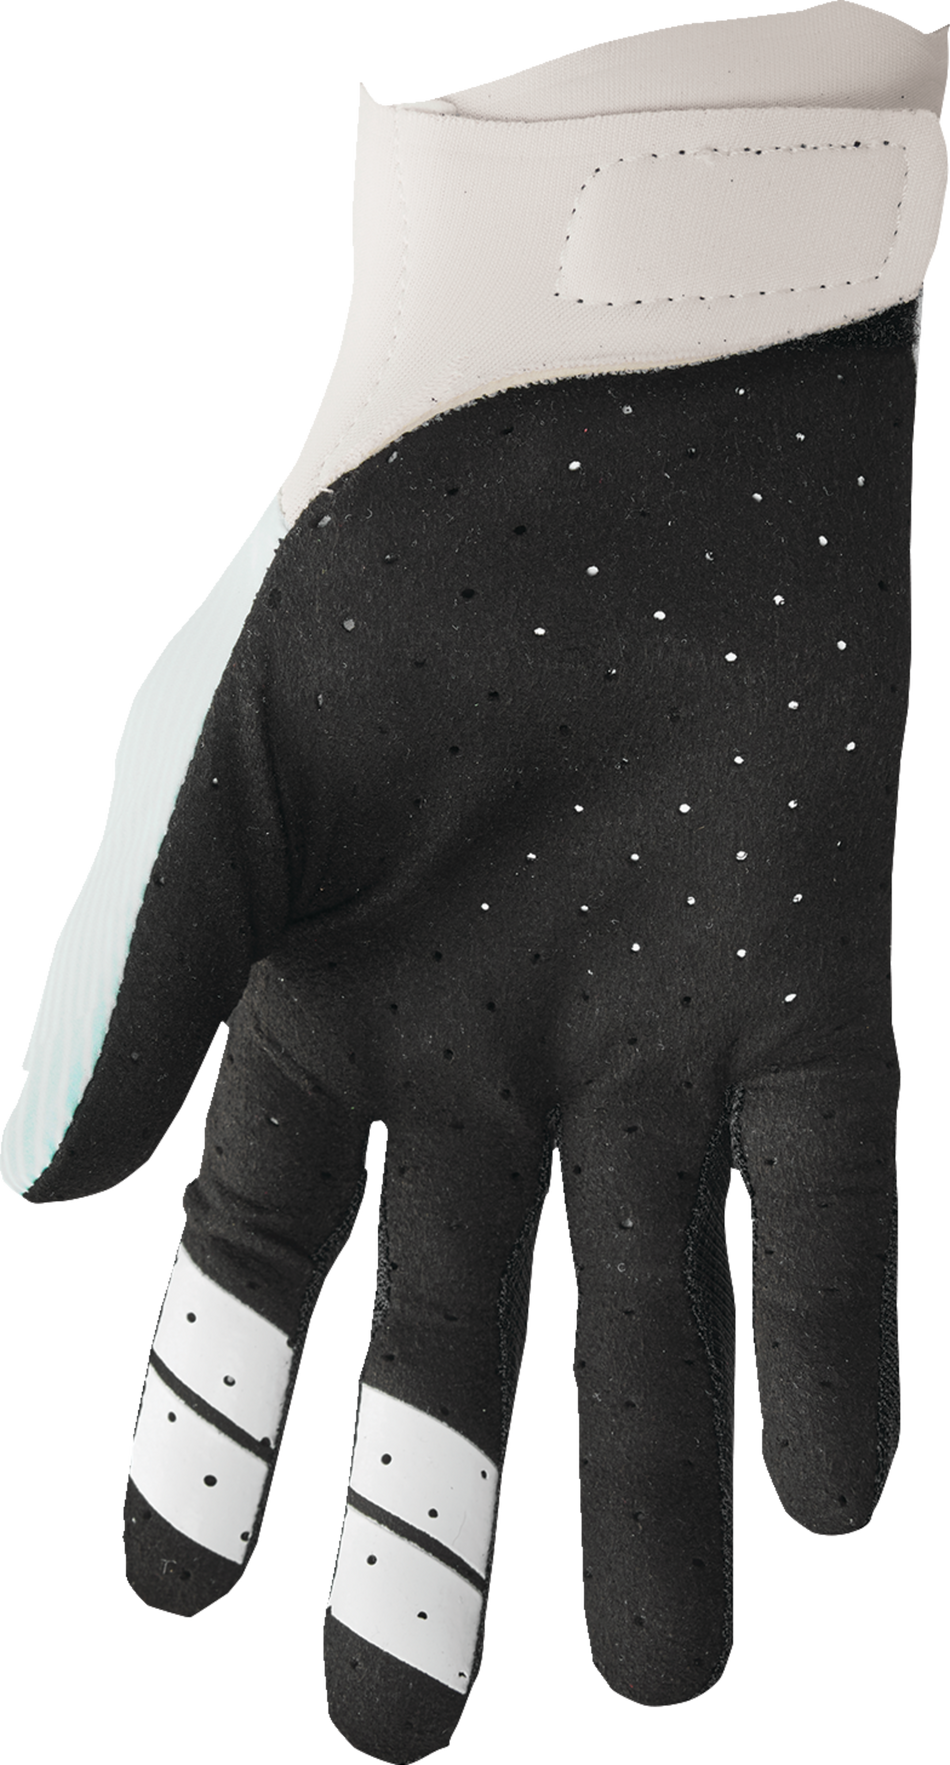 THOR Agile Tech Gloves - White/Teal - Large 3330-7210